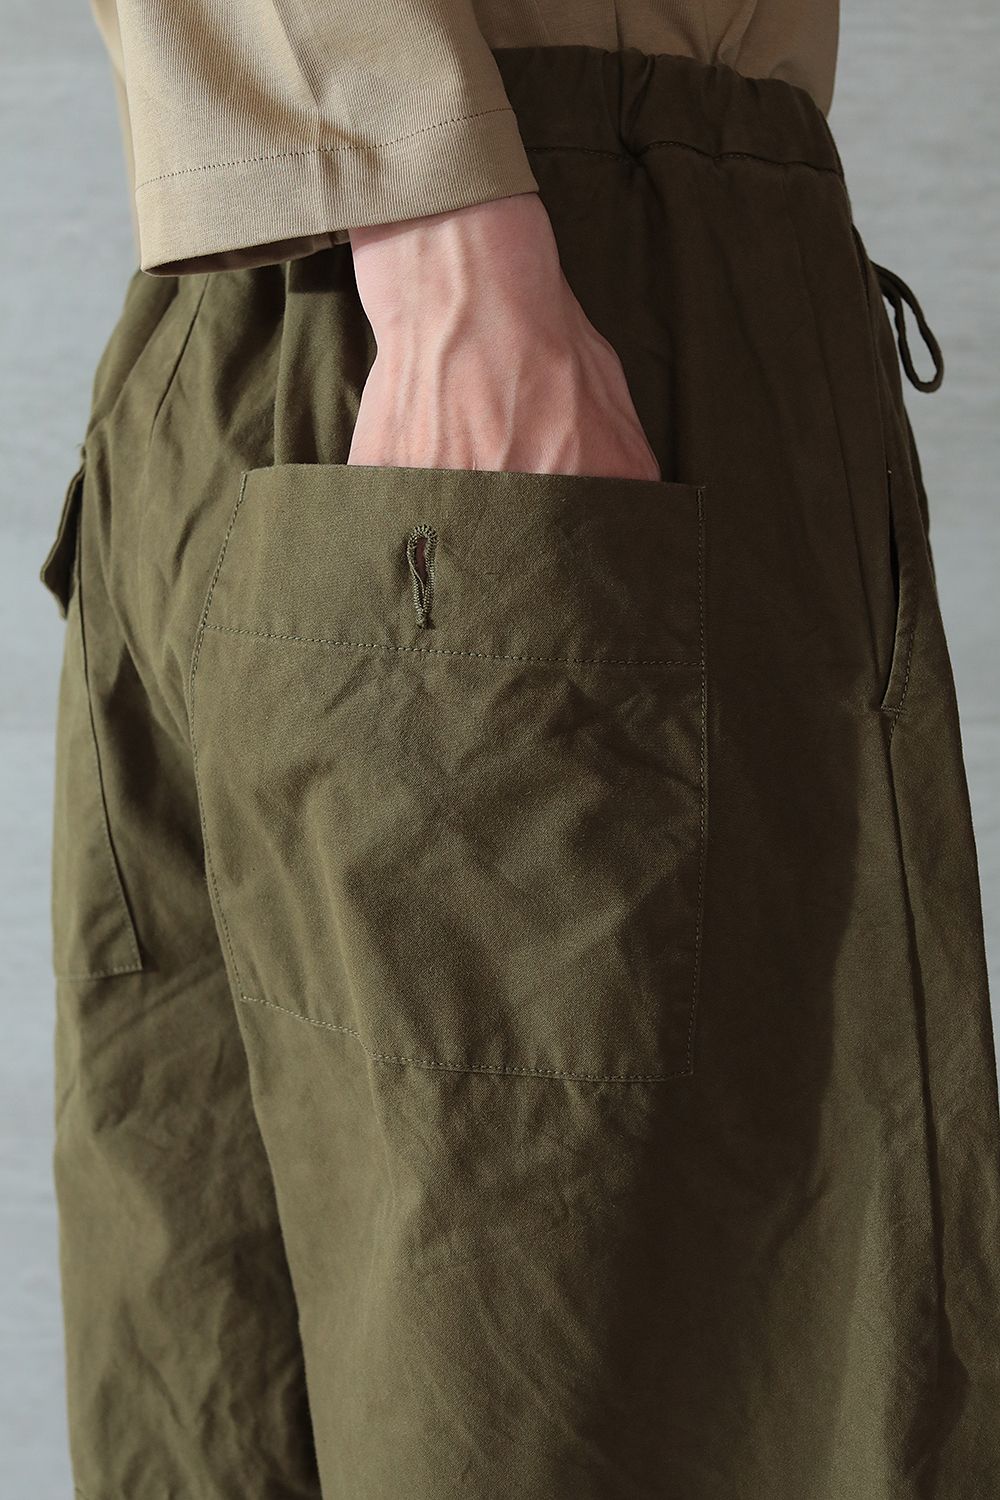 WORK BAGGY TROUSER(OLIVE) - M